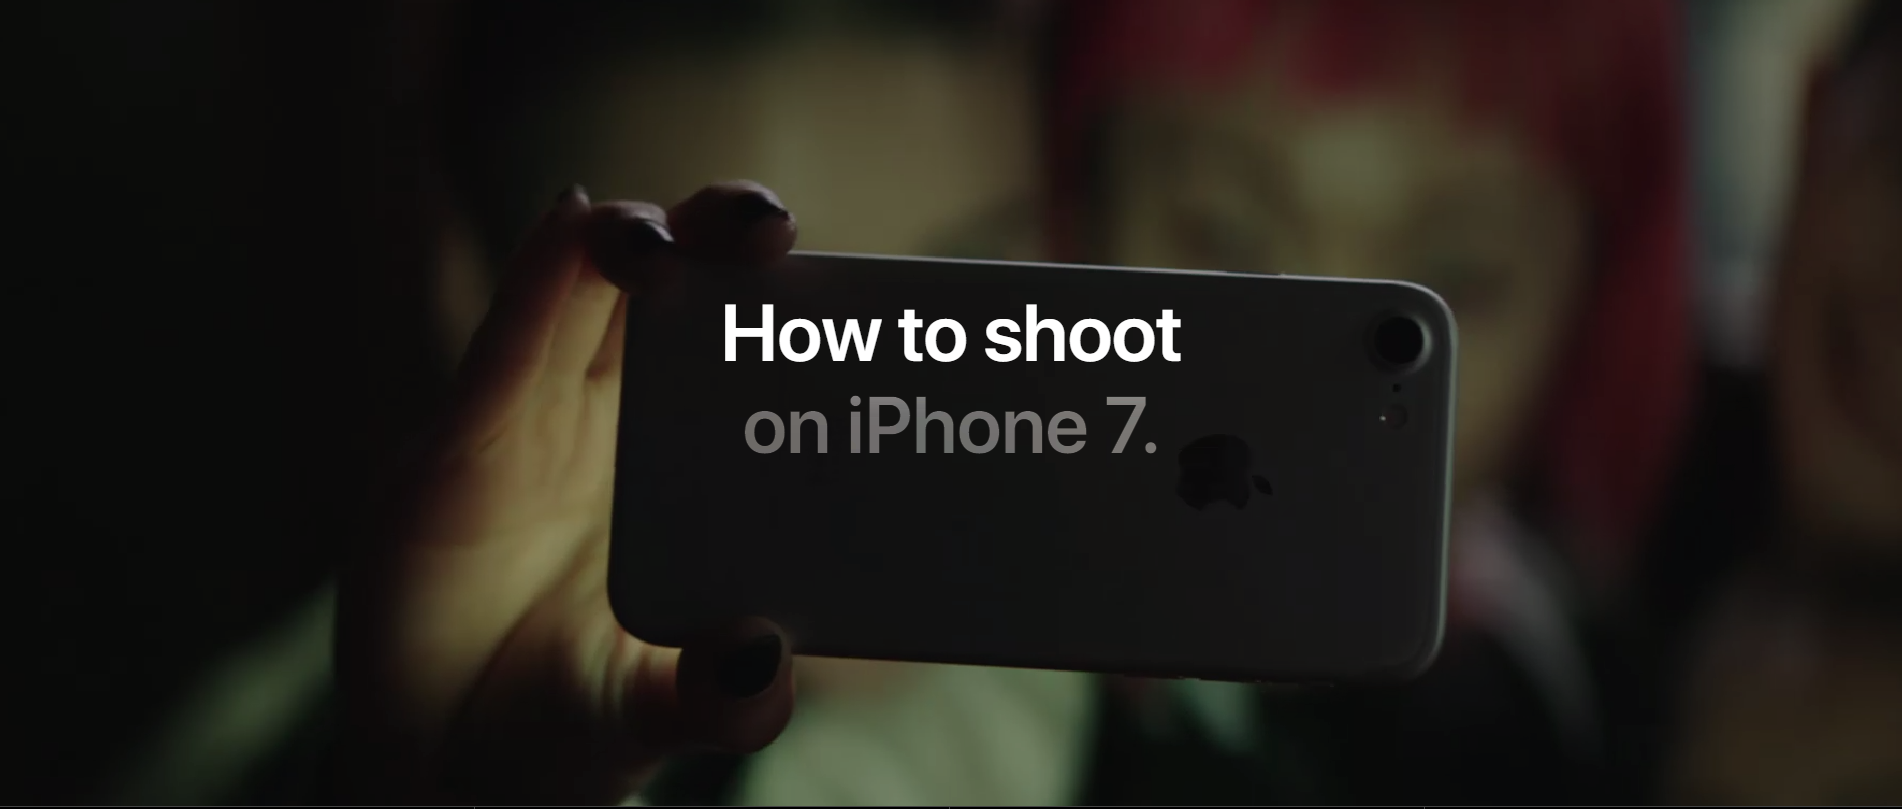 Apple wants to teach you how to use the iPhone&#039;s camera, launches photography tutorial series